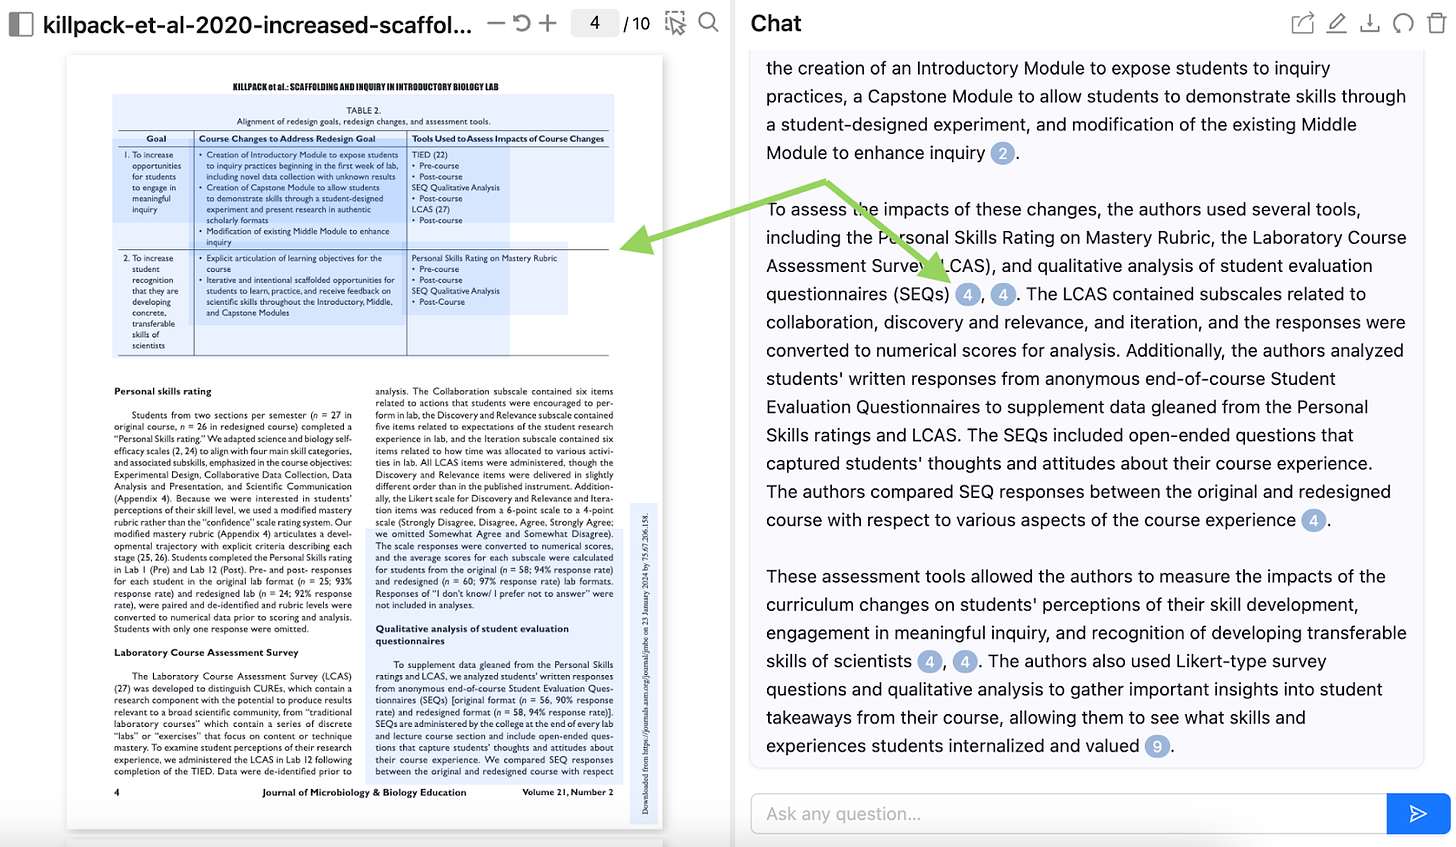 This image is a screenshot of a PDF document showing part of an academic article. The section visible in the screenshot discusses scaffolding and equity in an introductory biology lab. It includes a table titled "Alignment of redesign goals, strategies, and assessment tools." Below the table, there's a section with a heading "Personal skills rating" explaining a method for rating students' personal skills, and another section titled "Laboratory Course Assessment Survey" describing the survey used to assess students' perceptions in the lab. On the right, there's a chat panel with an open text box for input. The document includes annotations and highlights, emphasizing specific parts of the text related to assessment tools and methods used to measure the impact of course changes on students' skills and perceptions.